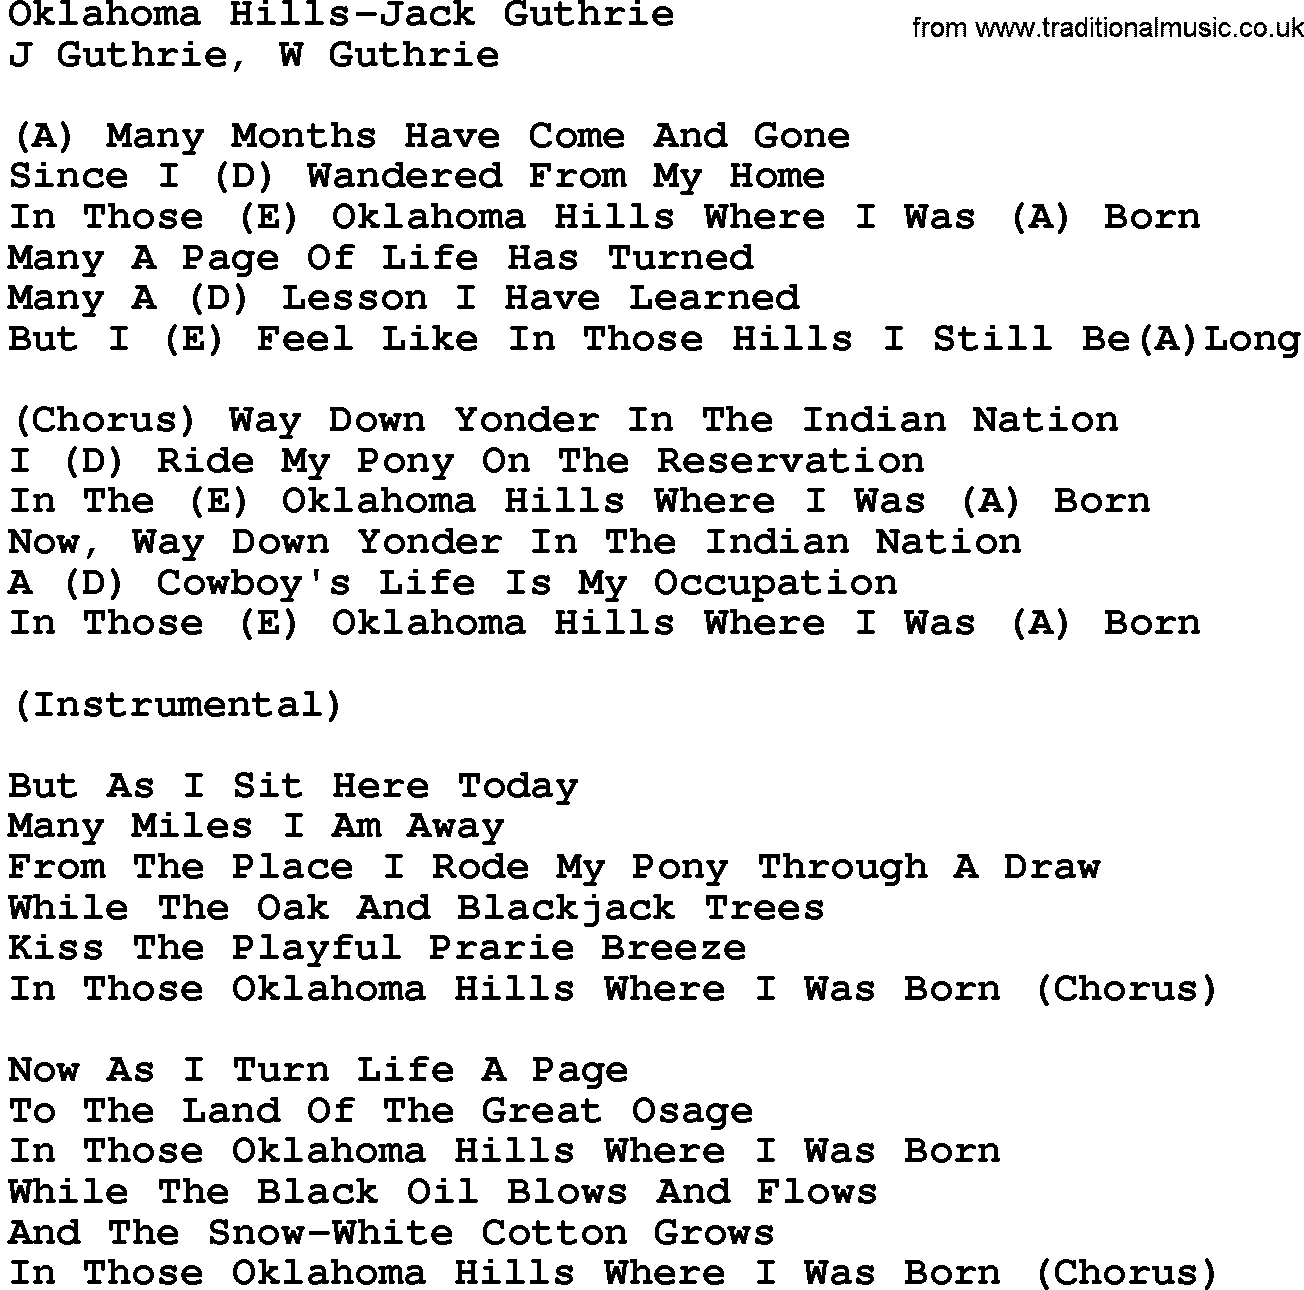 Country music song: Oklahoma Hills-Jack Guthrie lyrics and chords